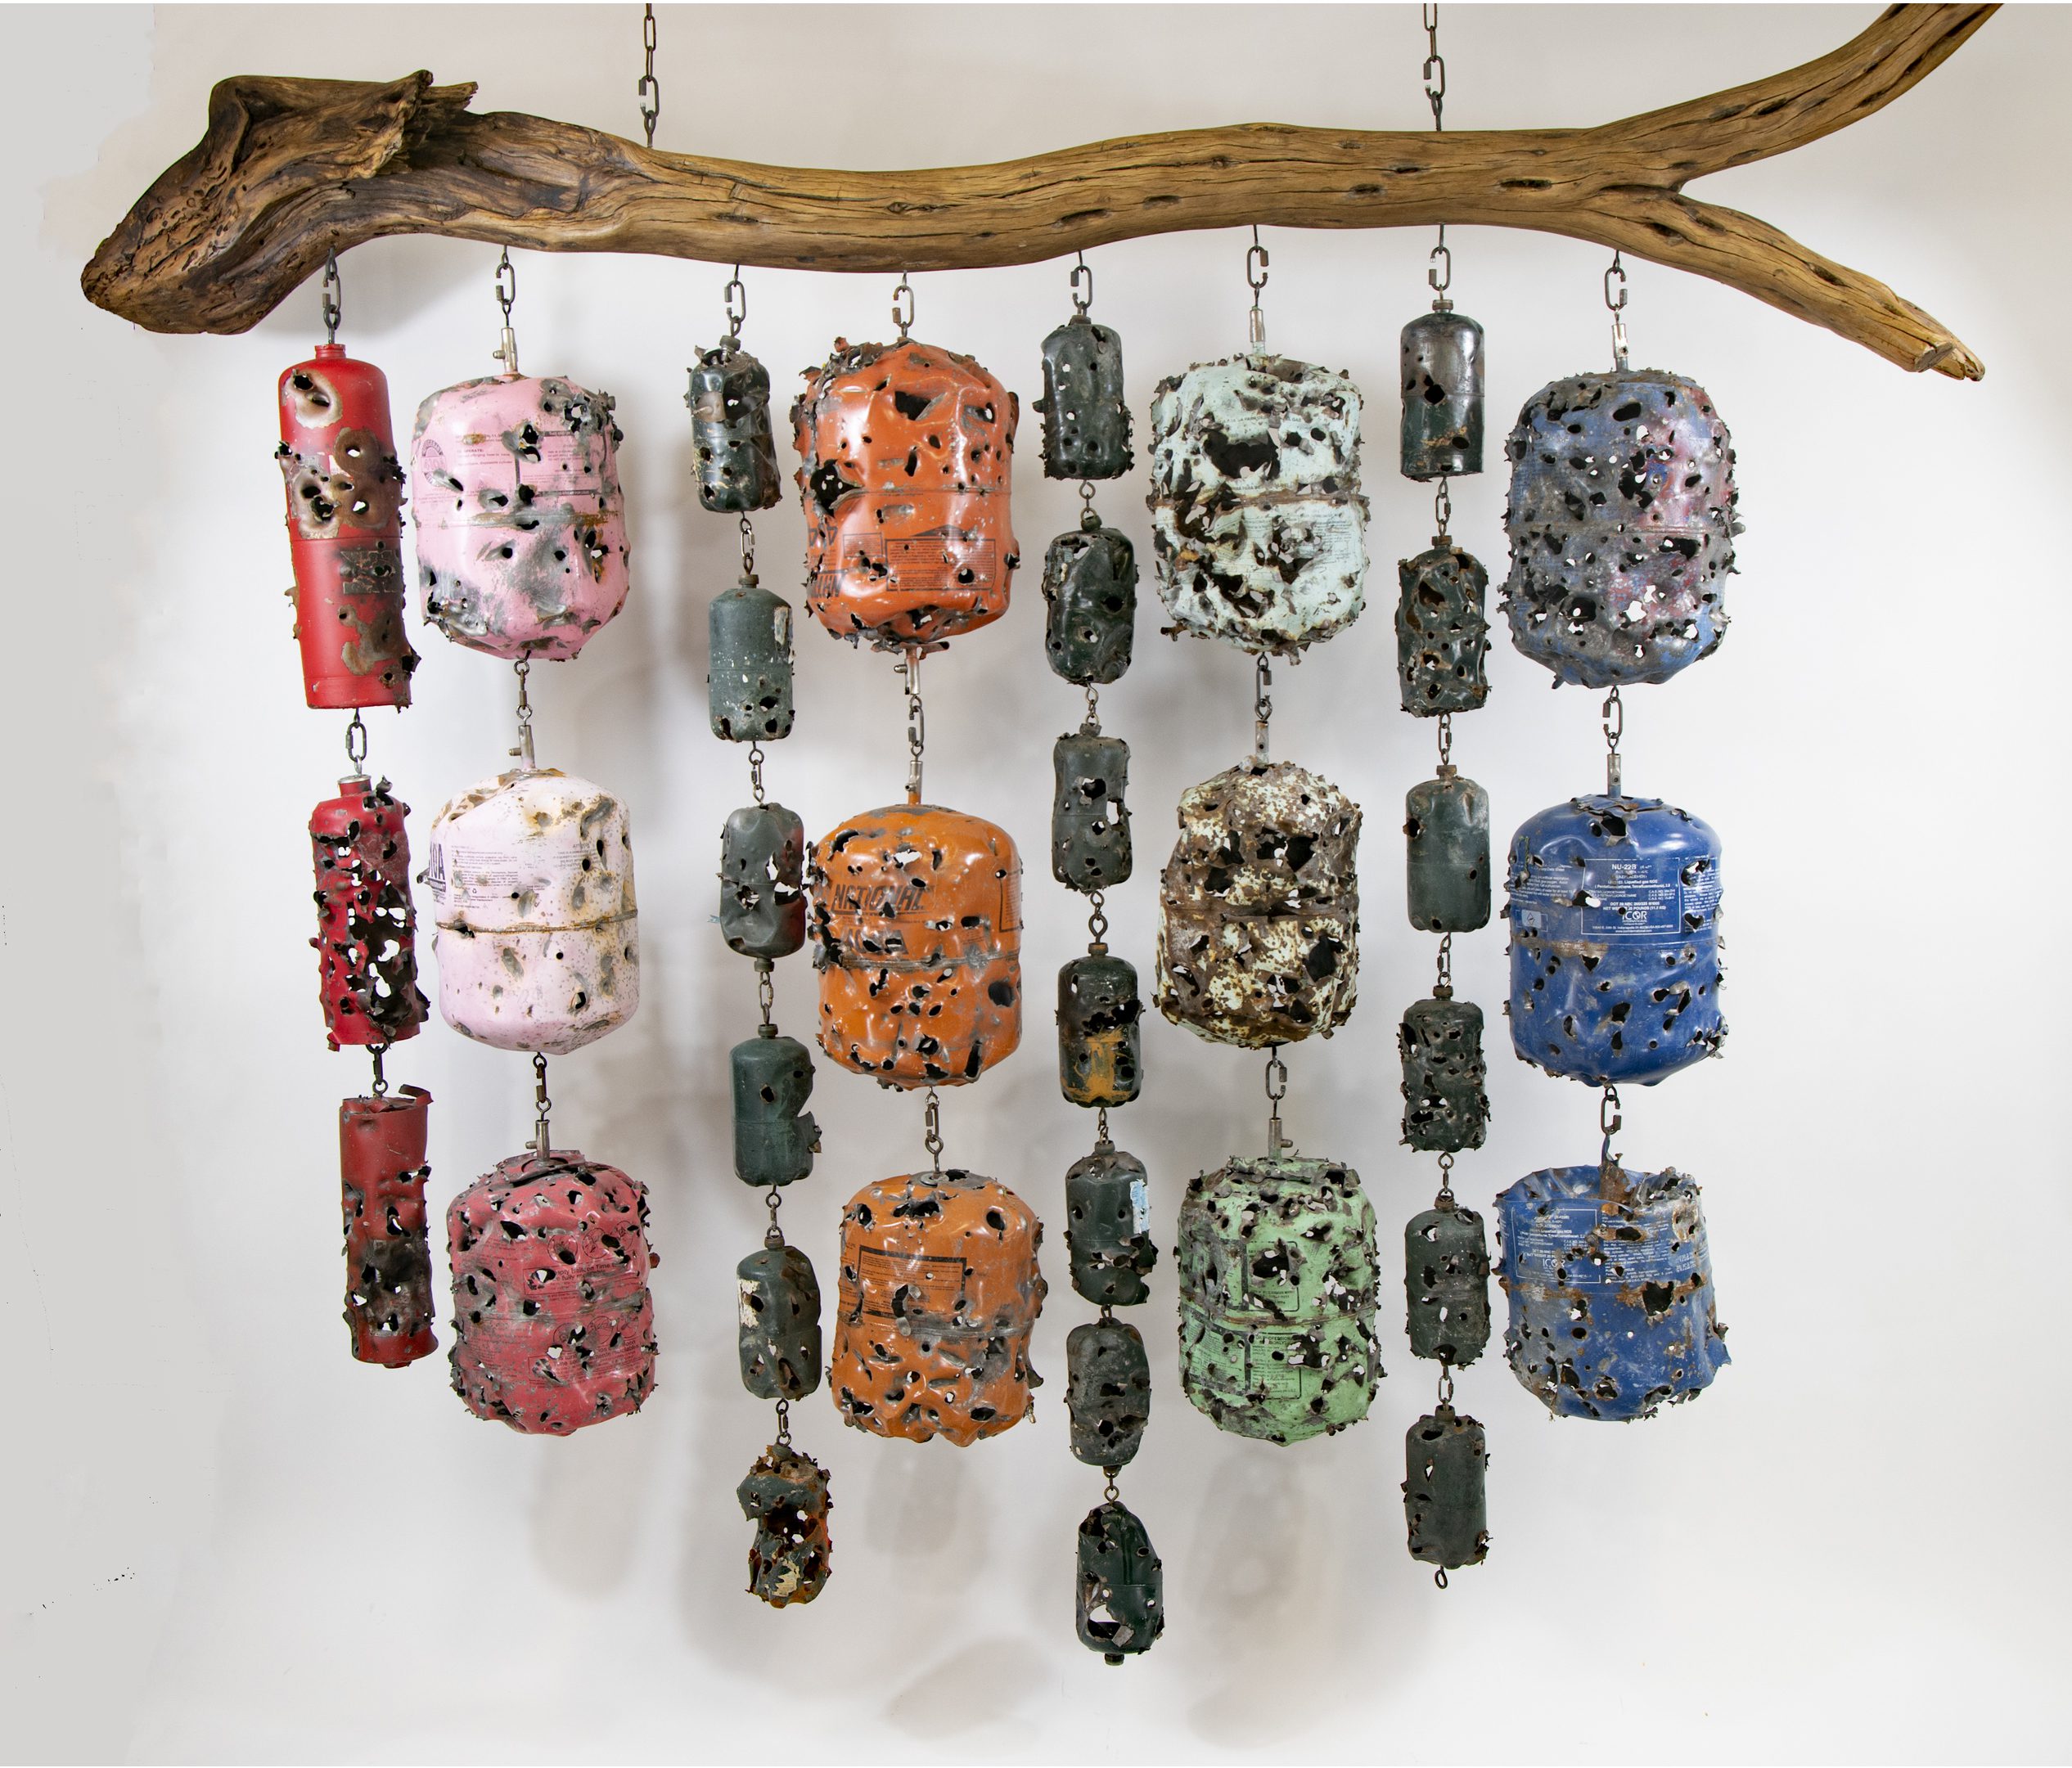 unique Wind Chime Art for Home or Outdoor Decor.